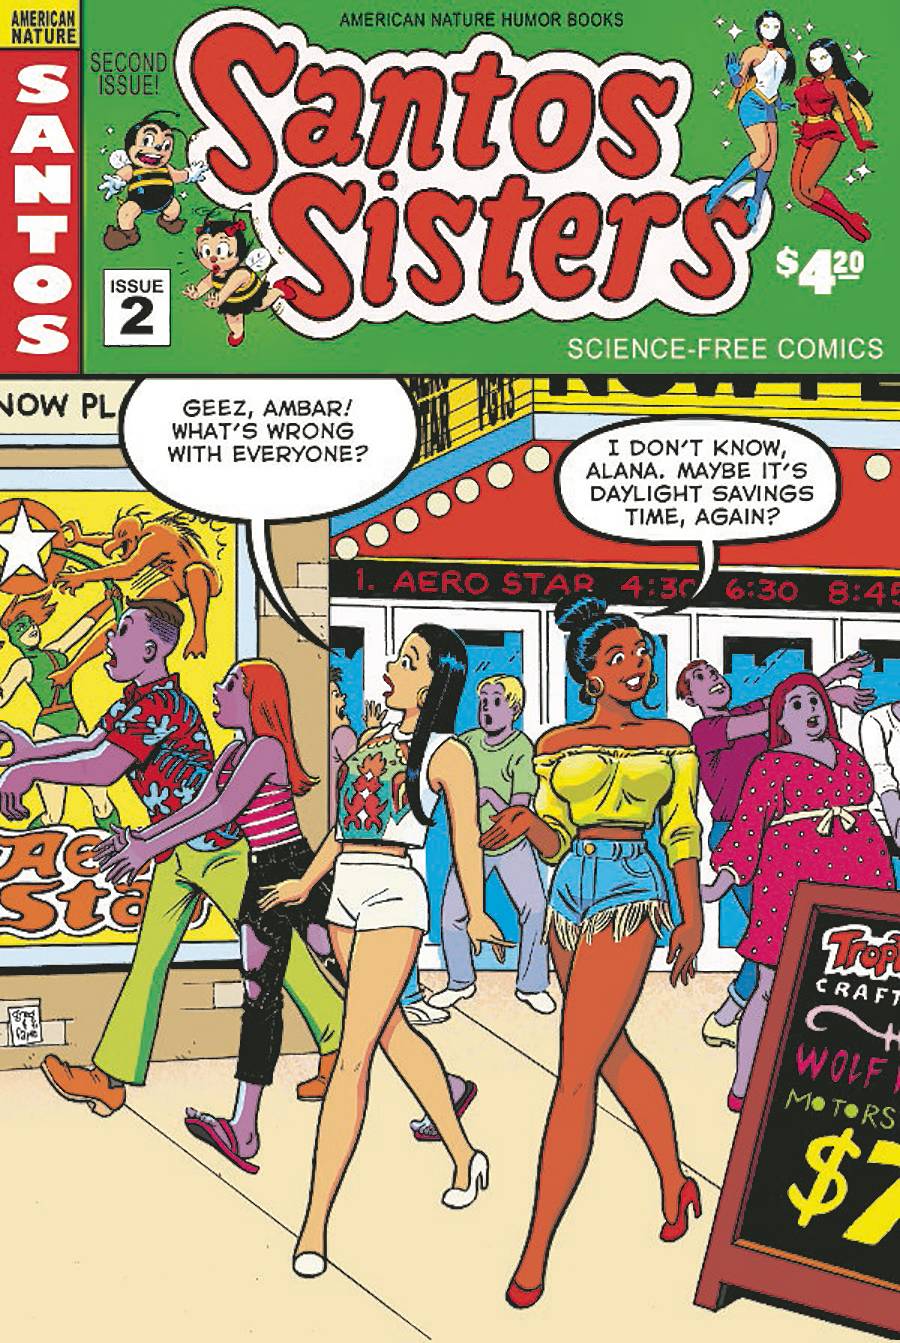 SANTOS SISTERS #2 by Greg and Fake